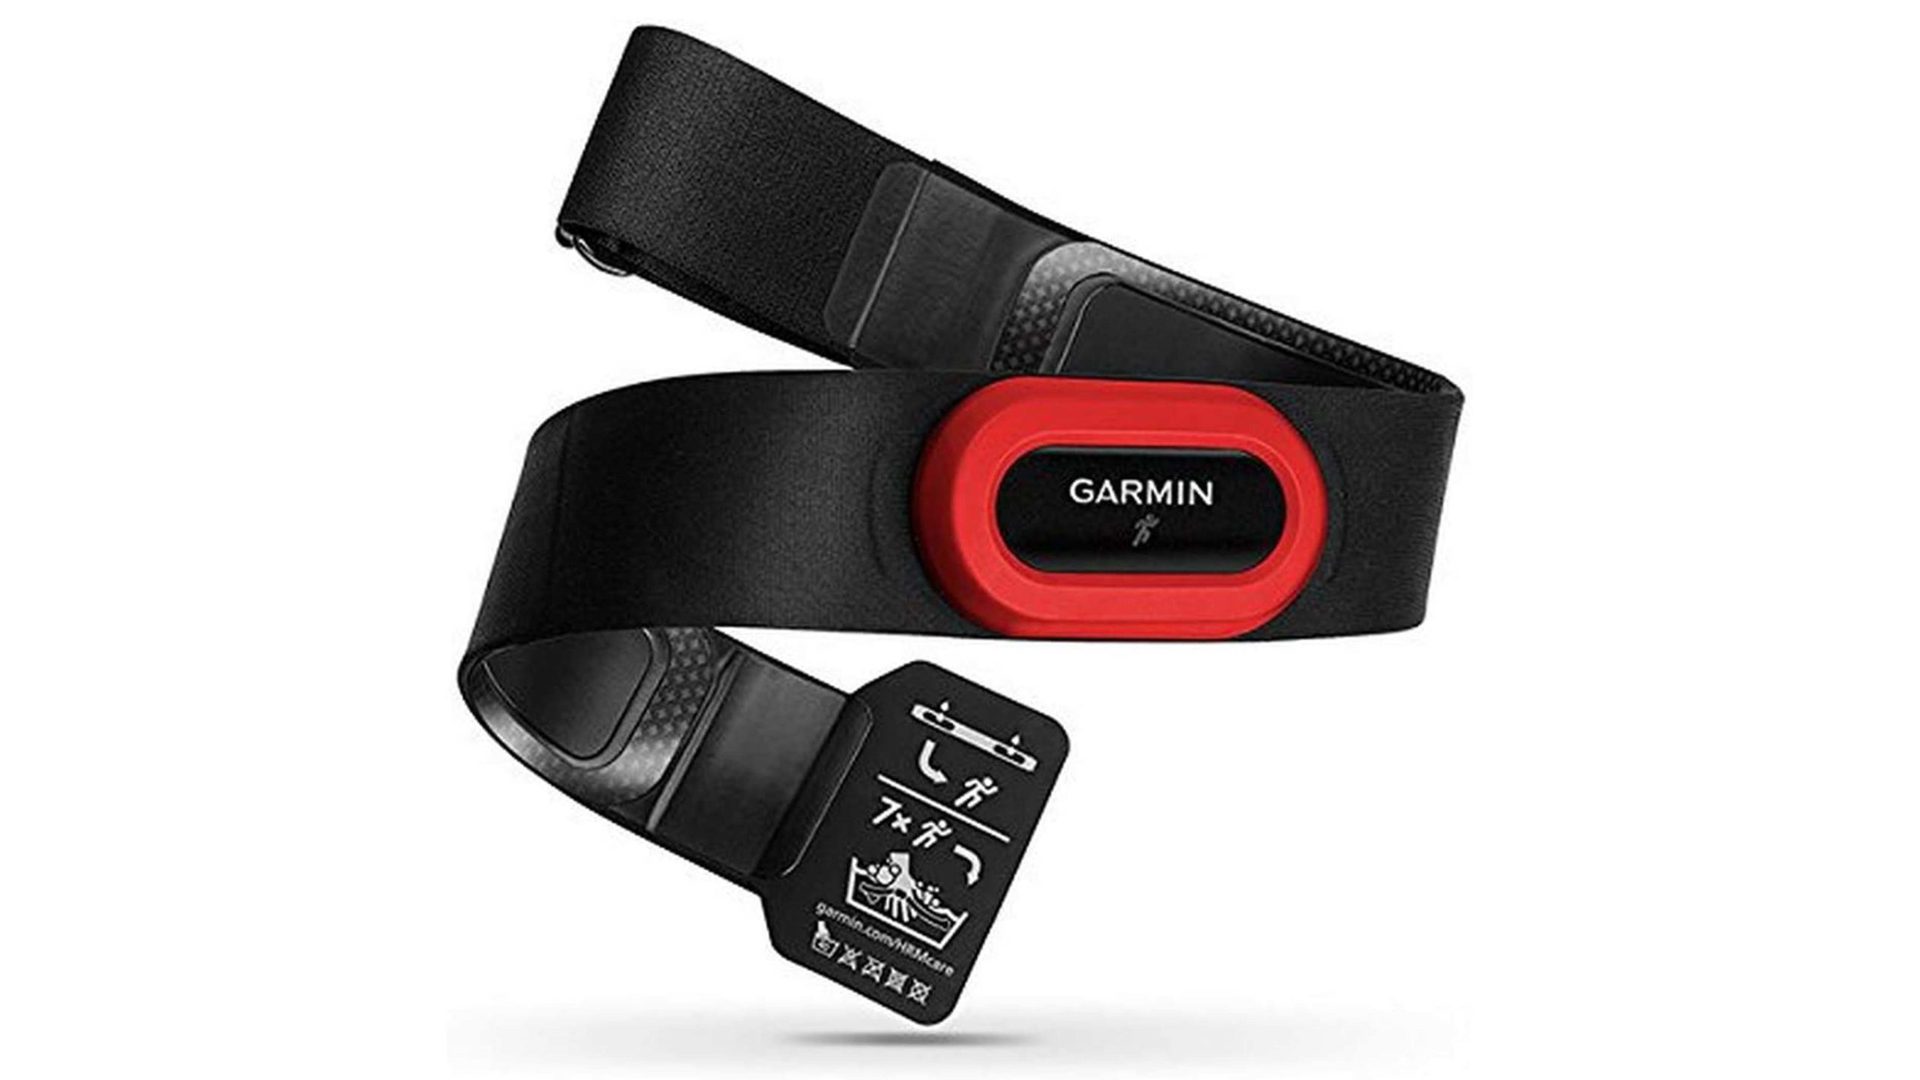 Product shot of the Garmin HMR-Run heart rate monitor chest strap for runners.